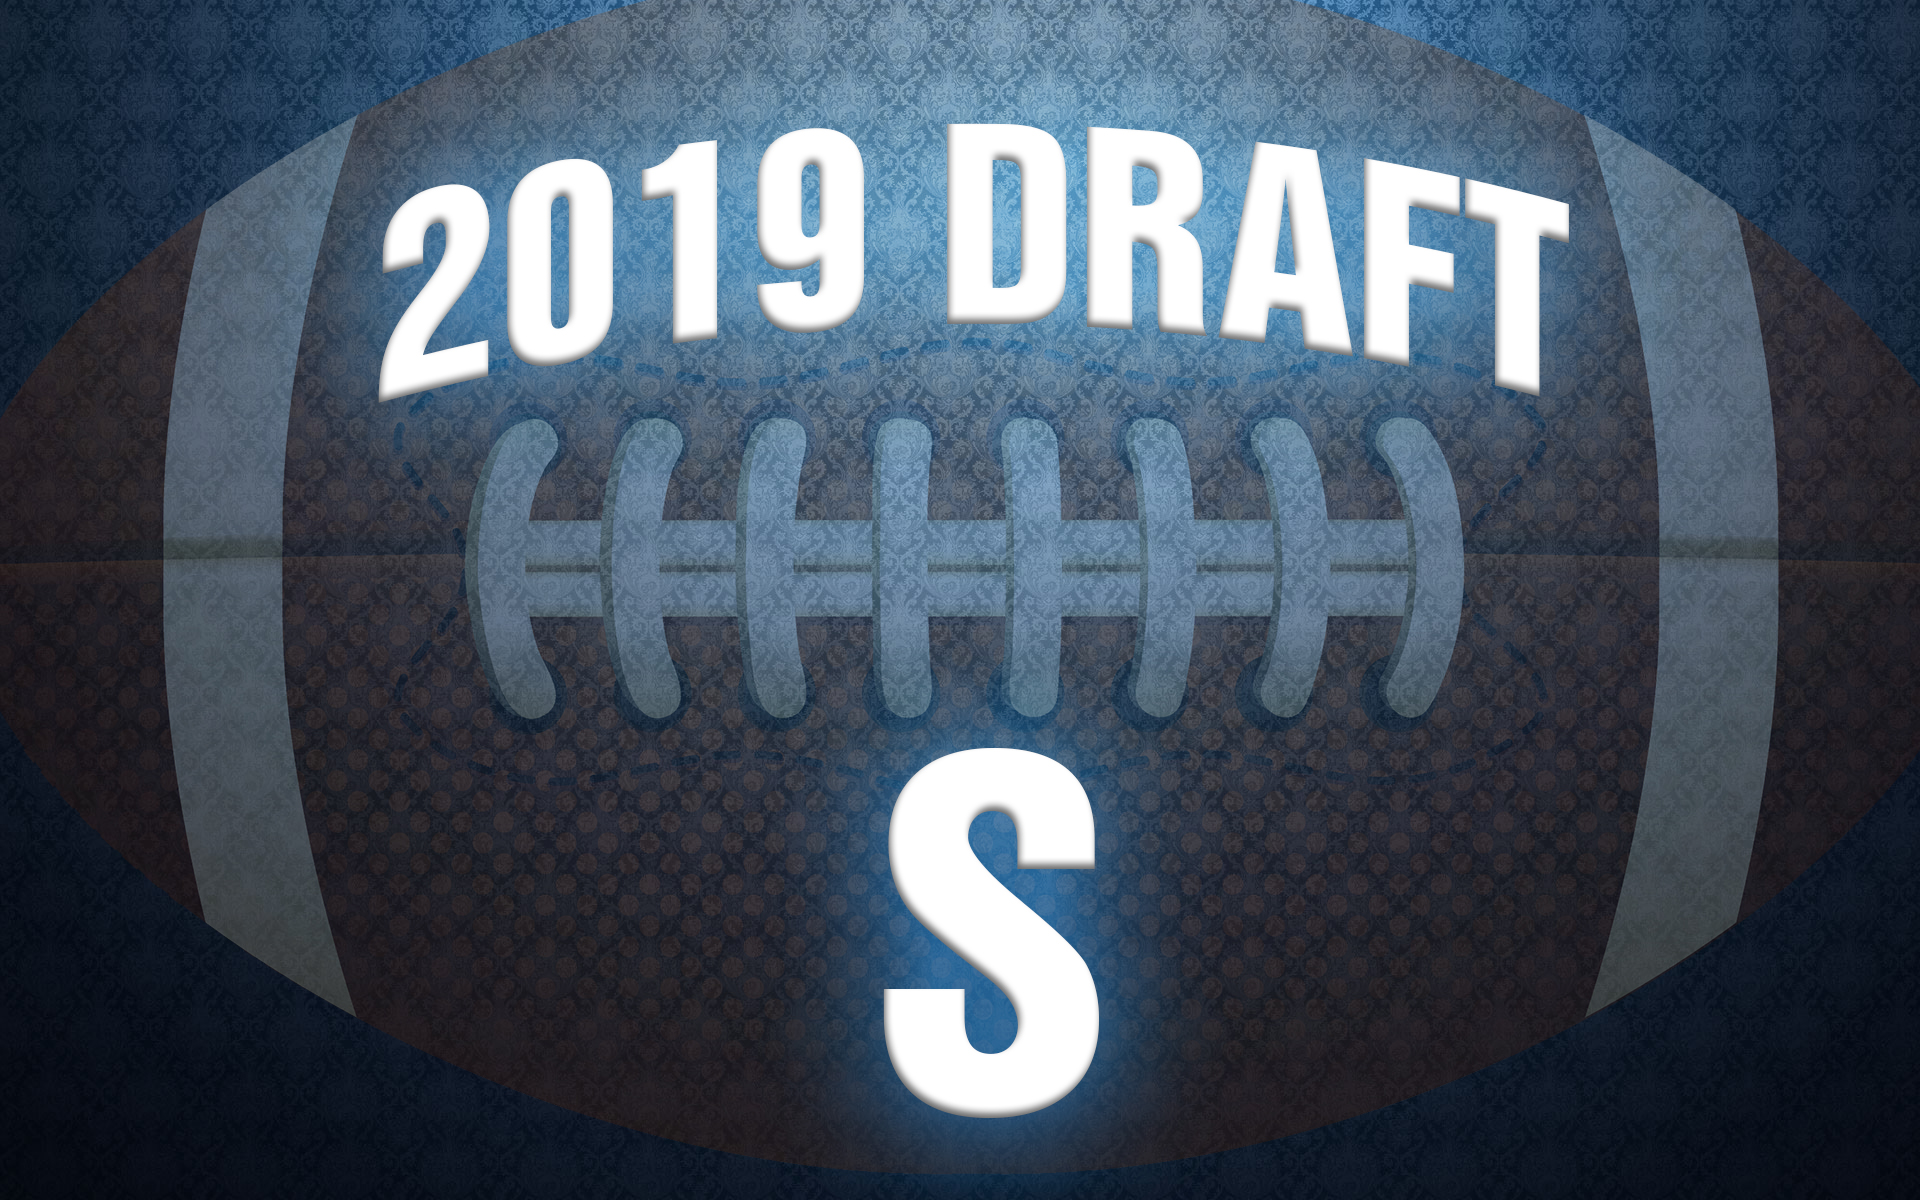 NFL Draft safety rankings 2019